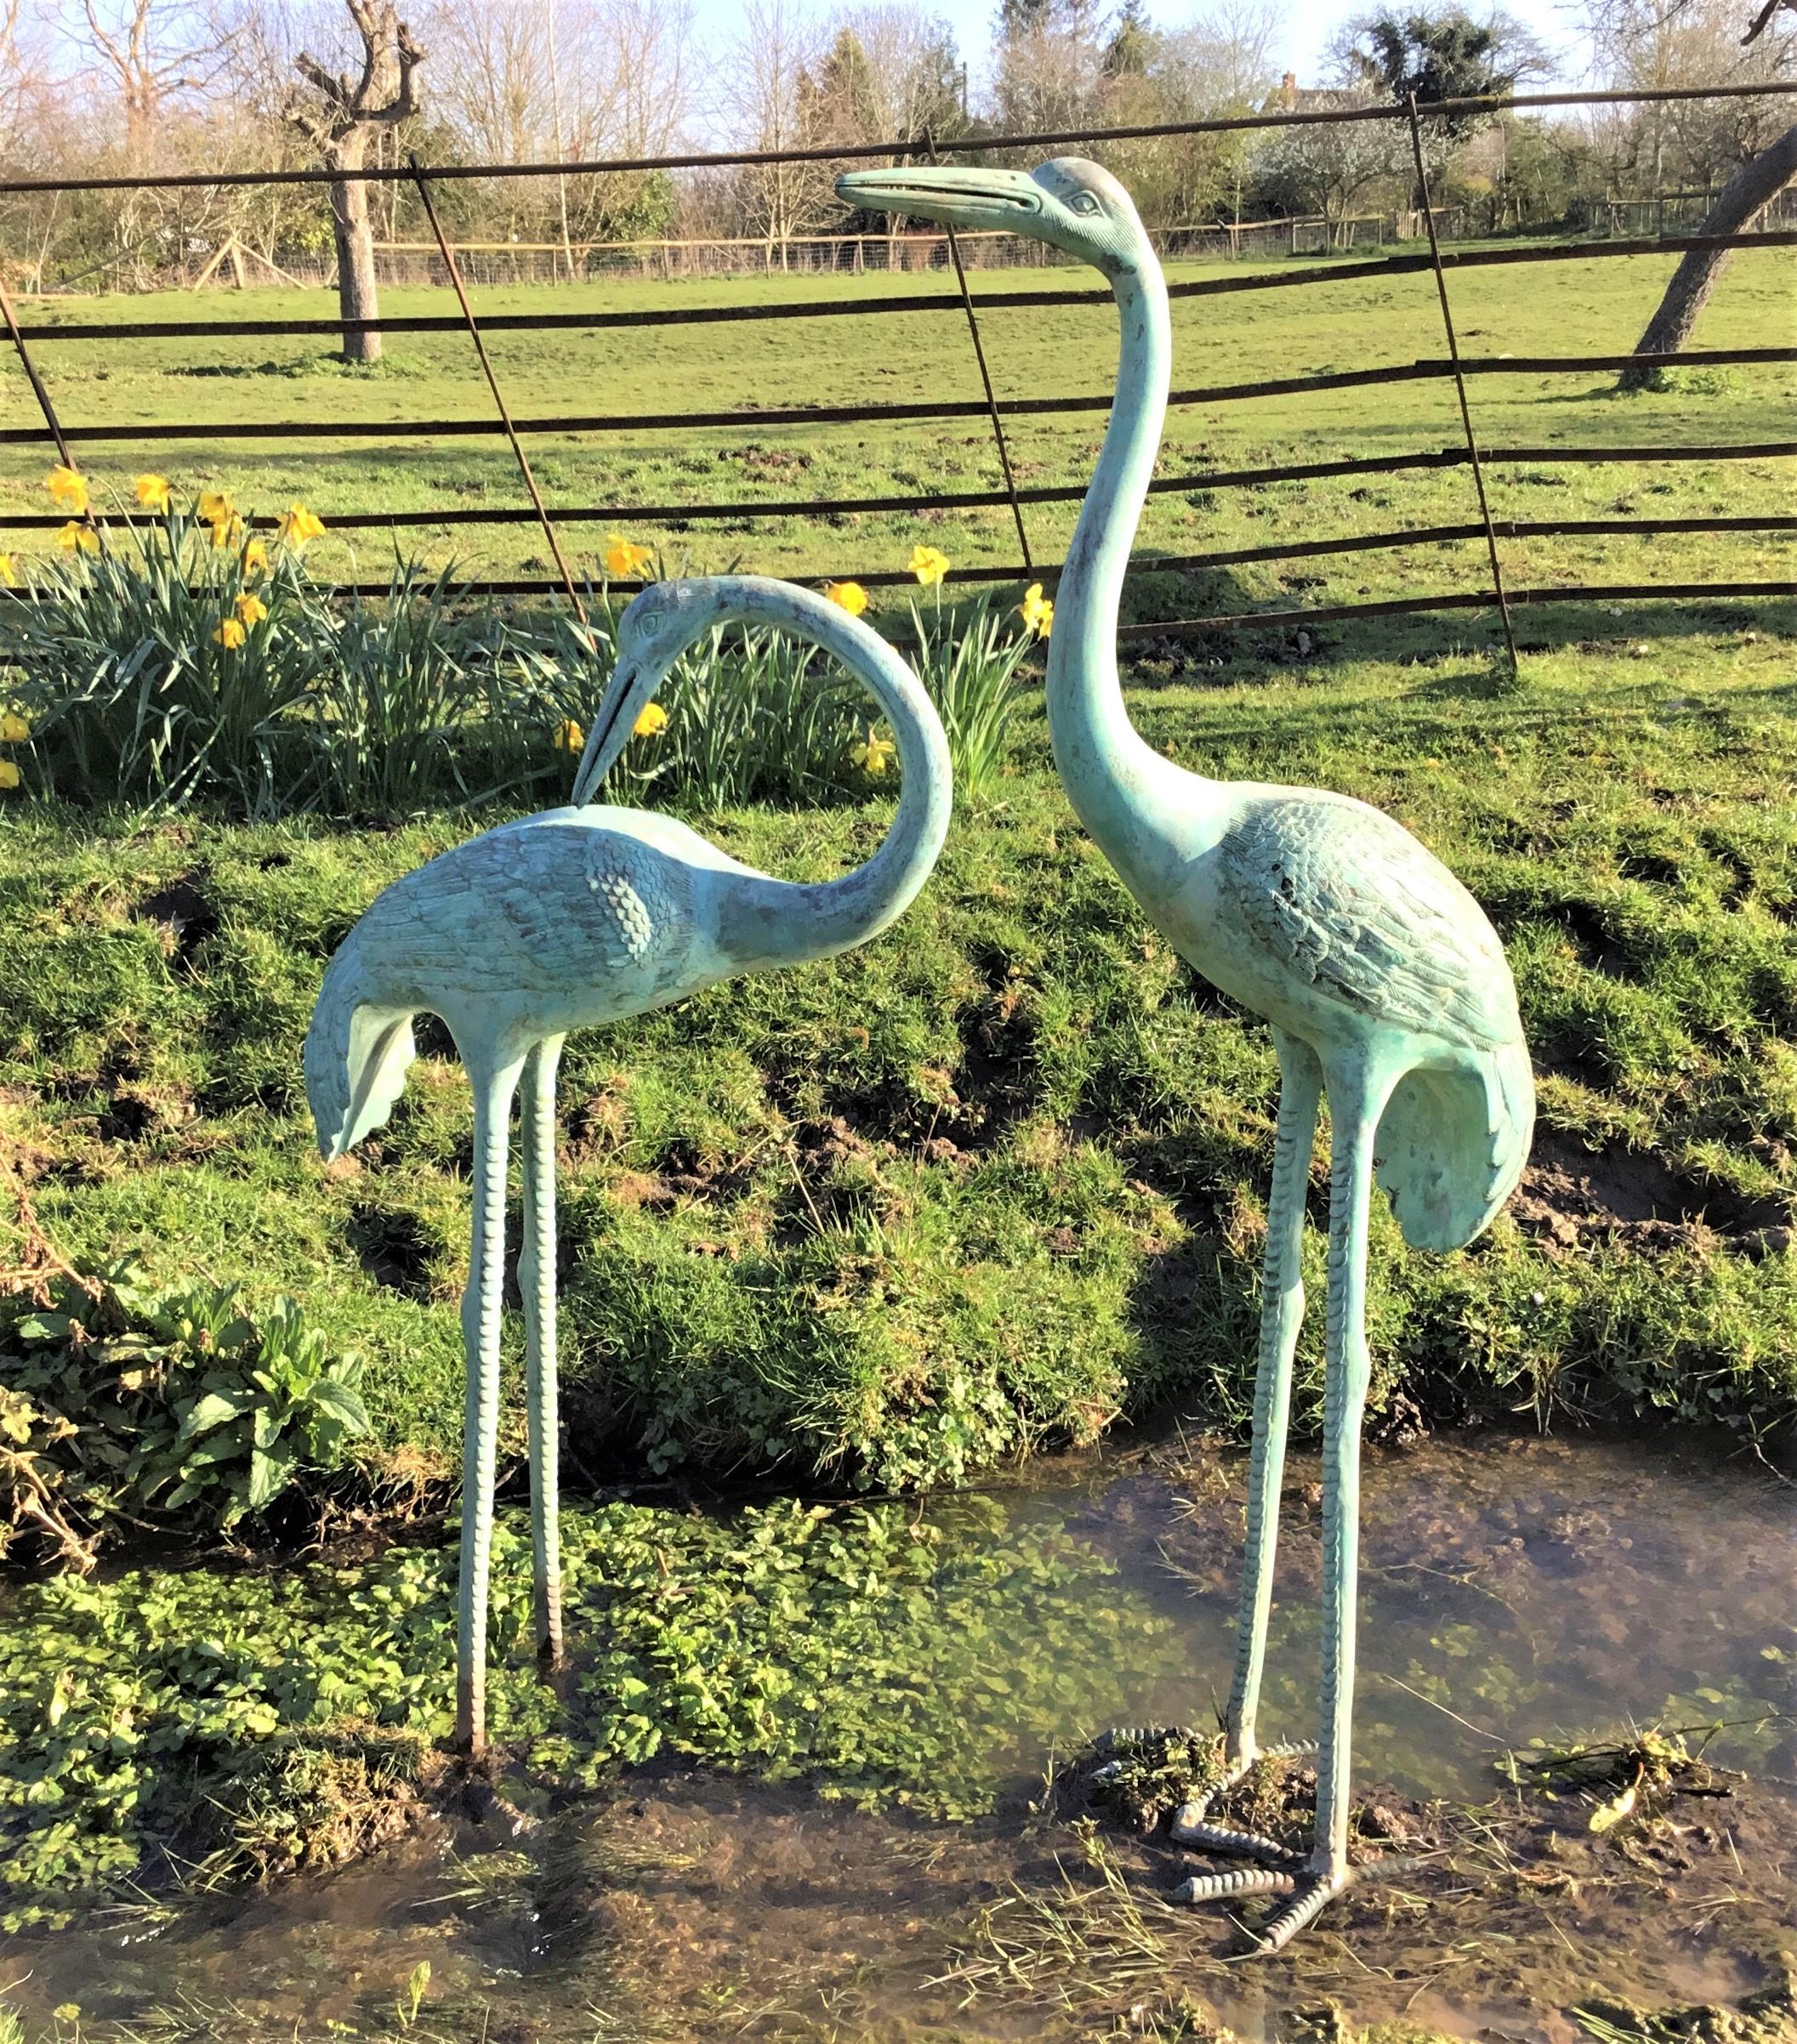 An impressive early 20th century large pair of Japanese bronze cranes, life-size with a verdigris patination, realistically sculptured with detailed feathers, scaled legs and webbed feet. The large male bird standing alert with his neck and head